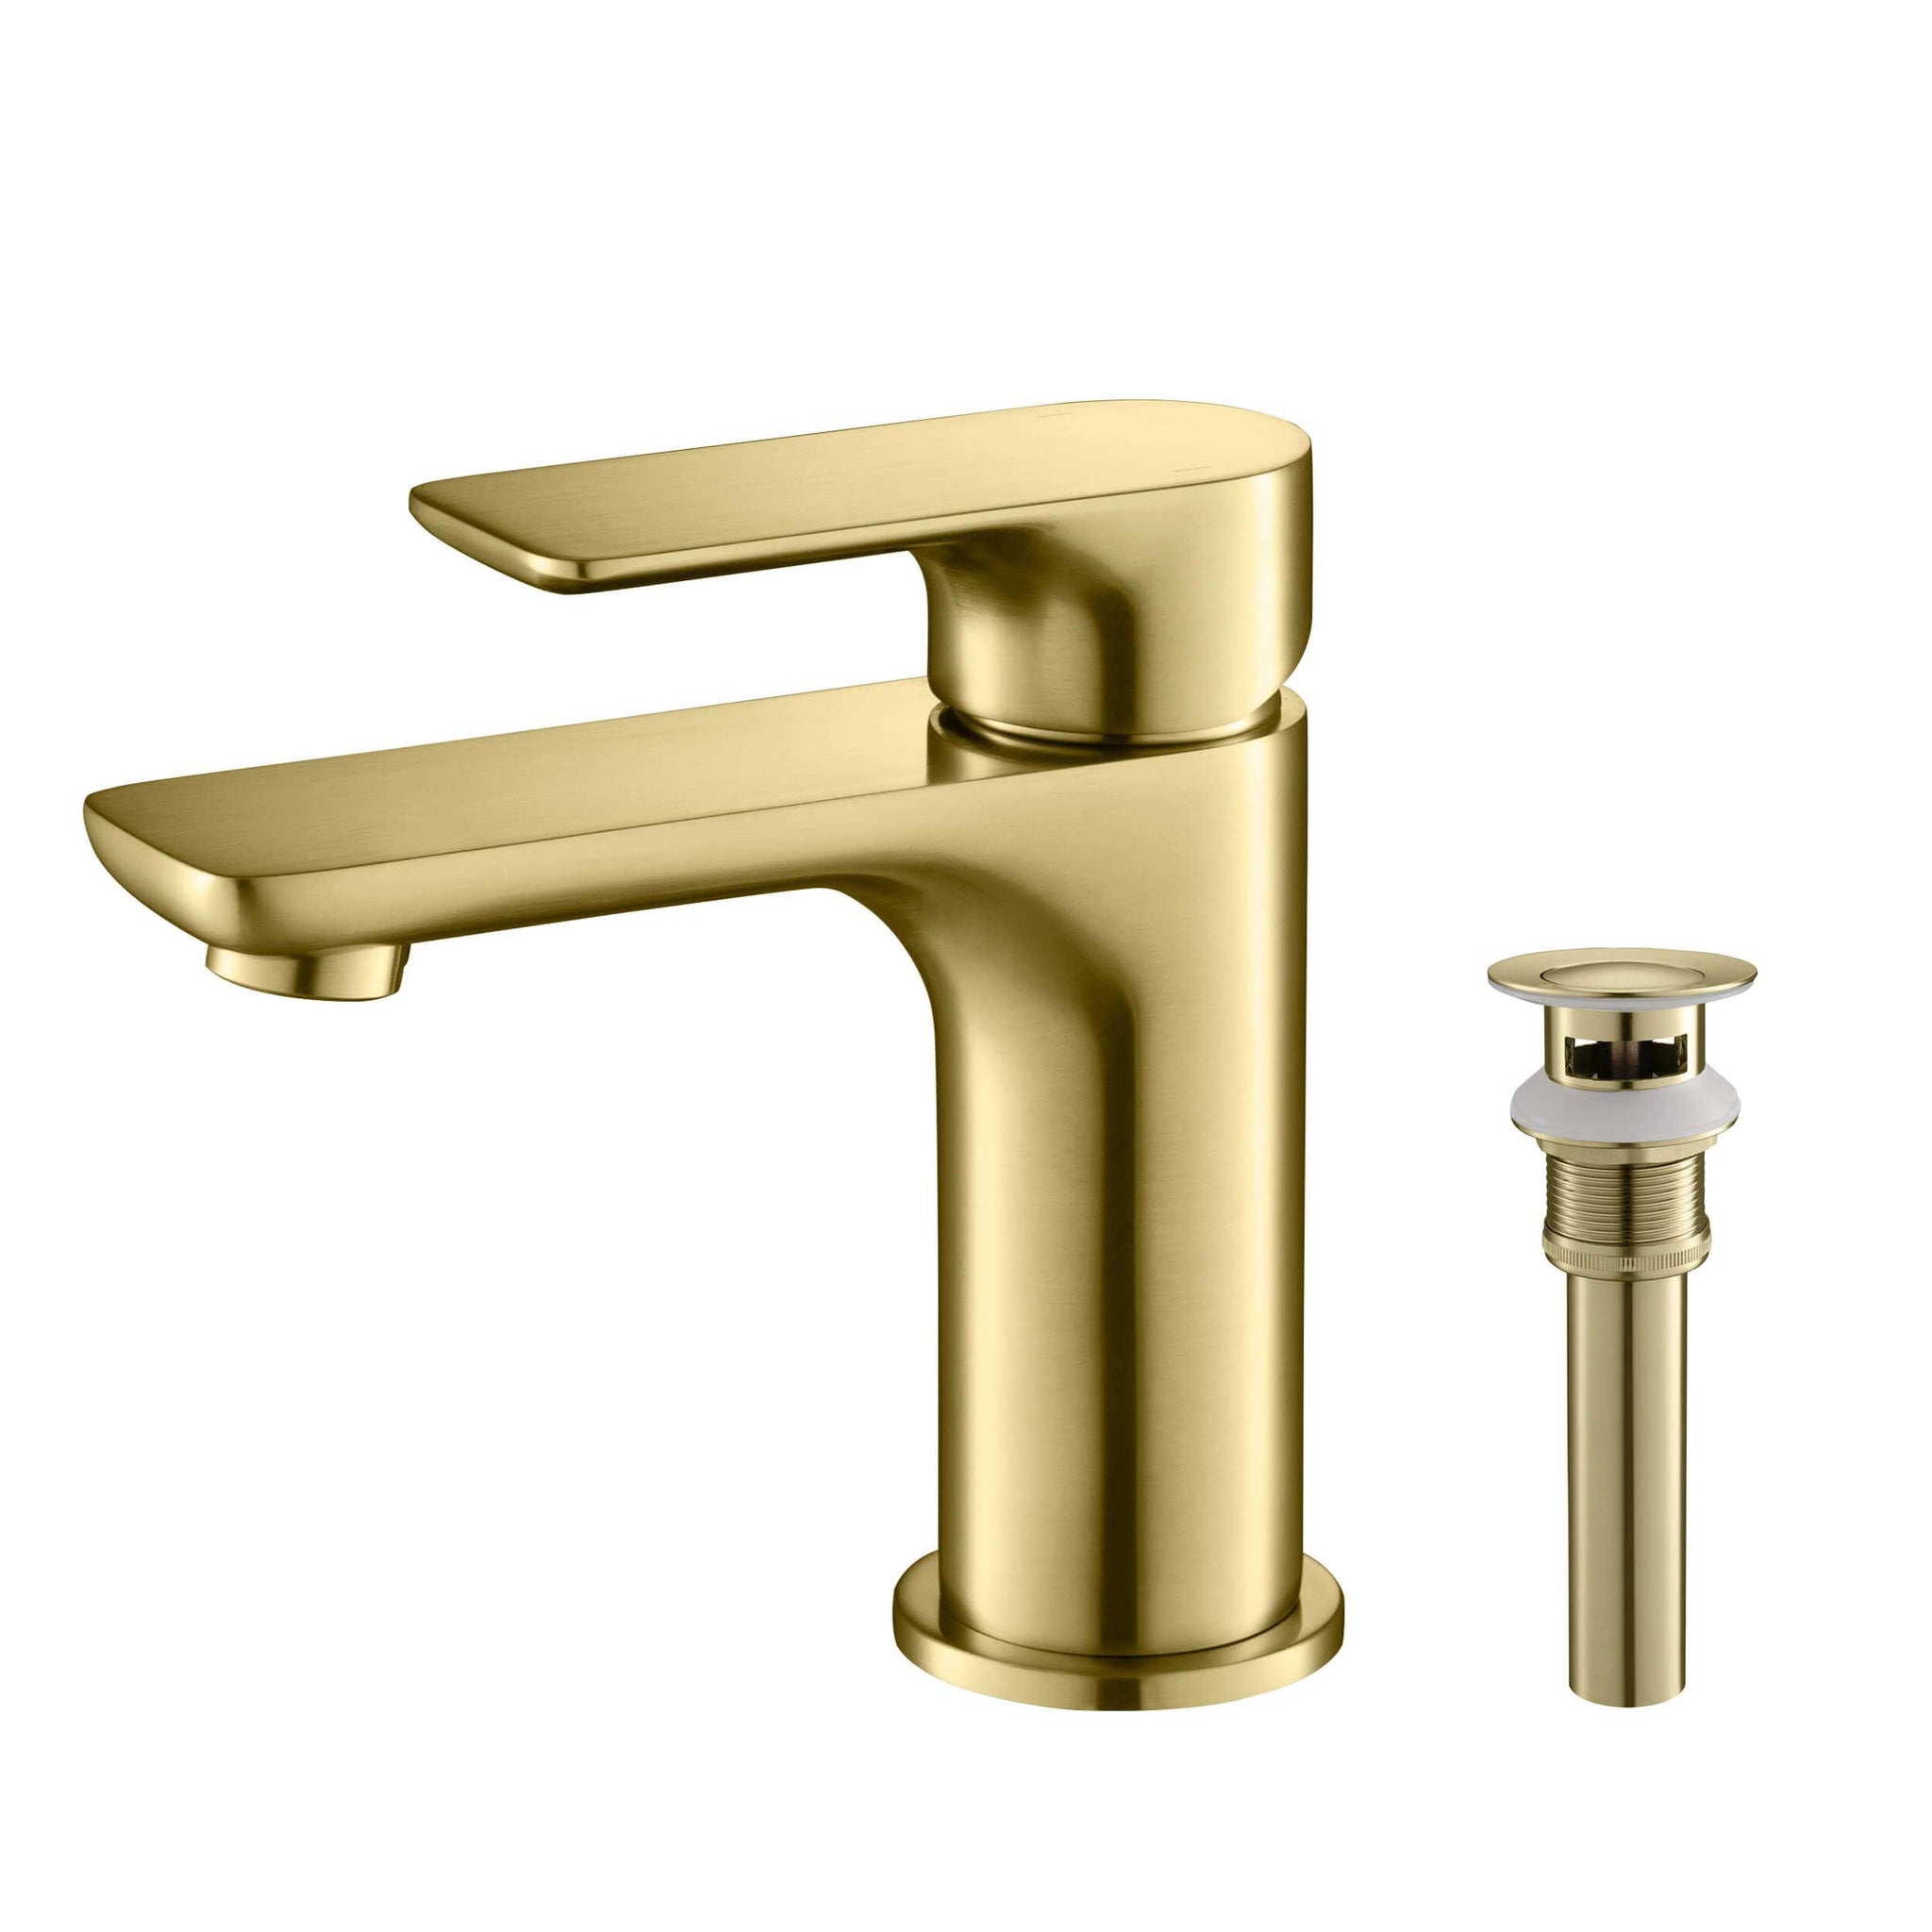 KIBI, KIBI Tender Single Handle Brushed Gold Solid Brass Bathroom Sink Faucet With Pop-Up Drain Stopper Small Cover With Overflow